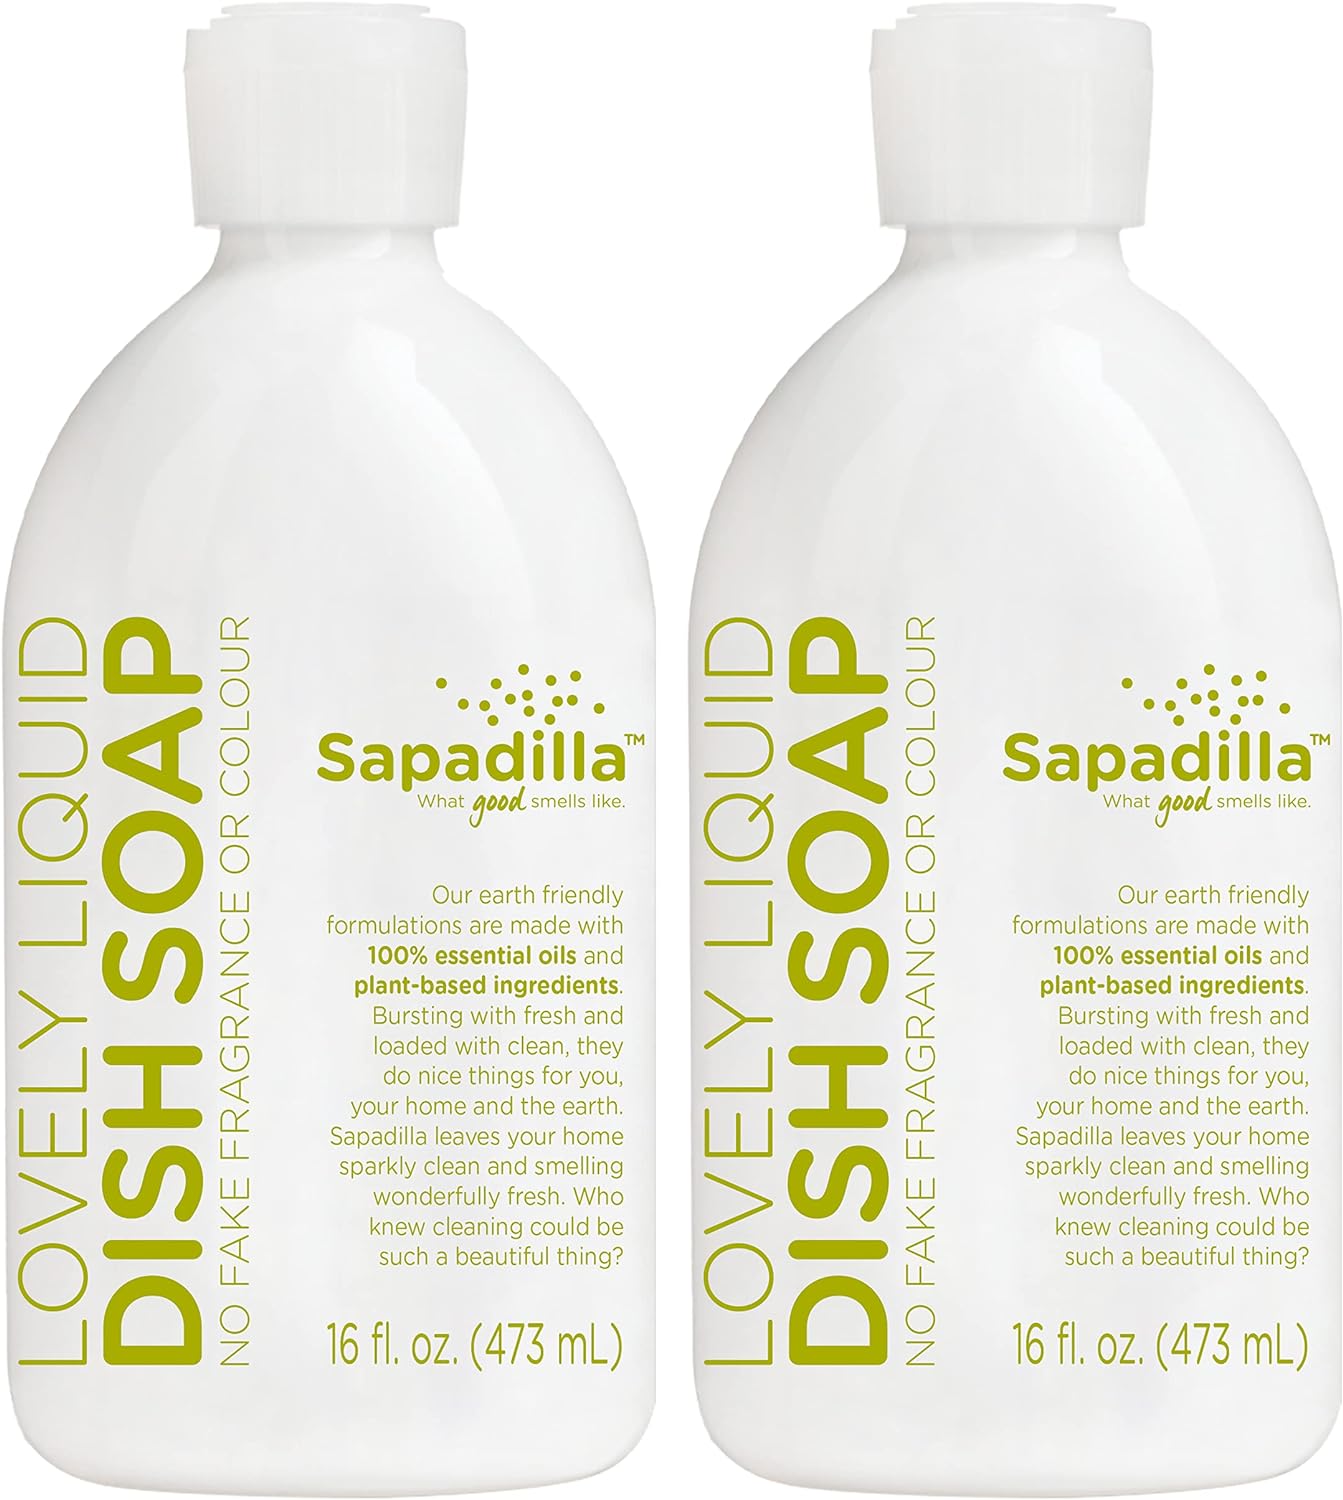 Sapadilla Liquid Dish Soap - Rosemary + Peppermint - Made with 100% Pure Essential Oil Blends, Tough on Grease, Aromatic & Fragrant Dishwashing Liquid, Plant Based, Biodegradable, 12 Ounce (Pack of 2)